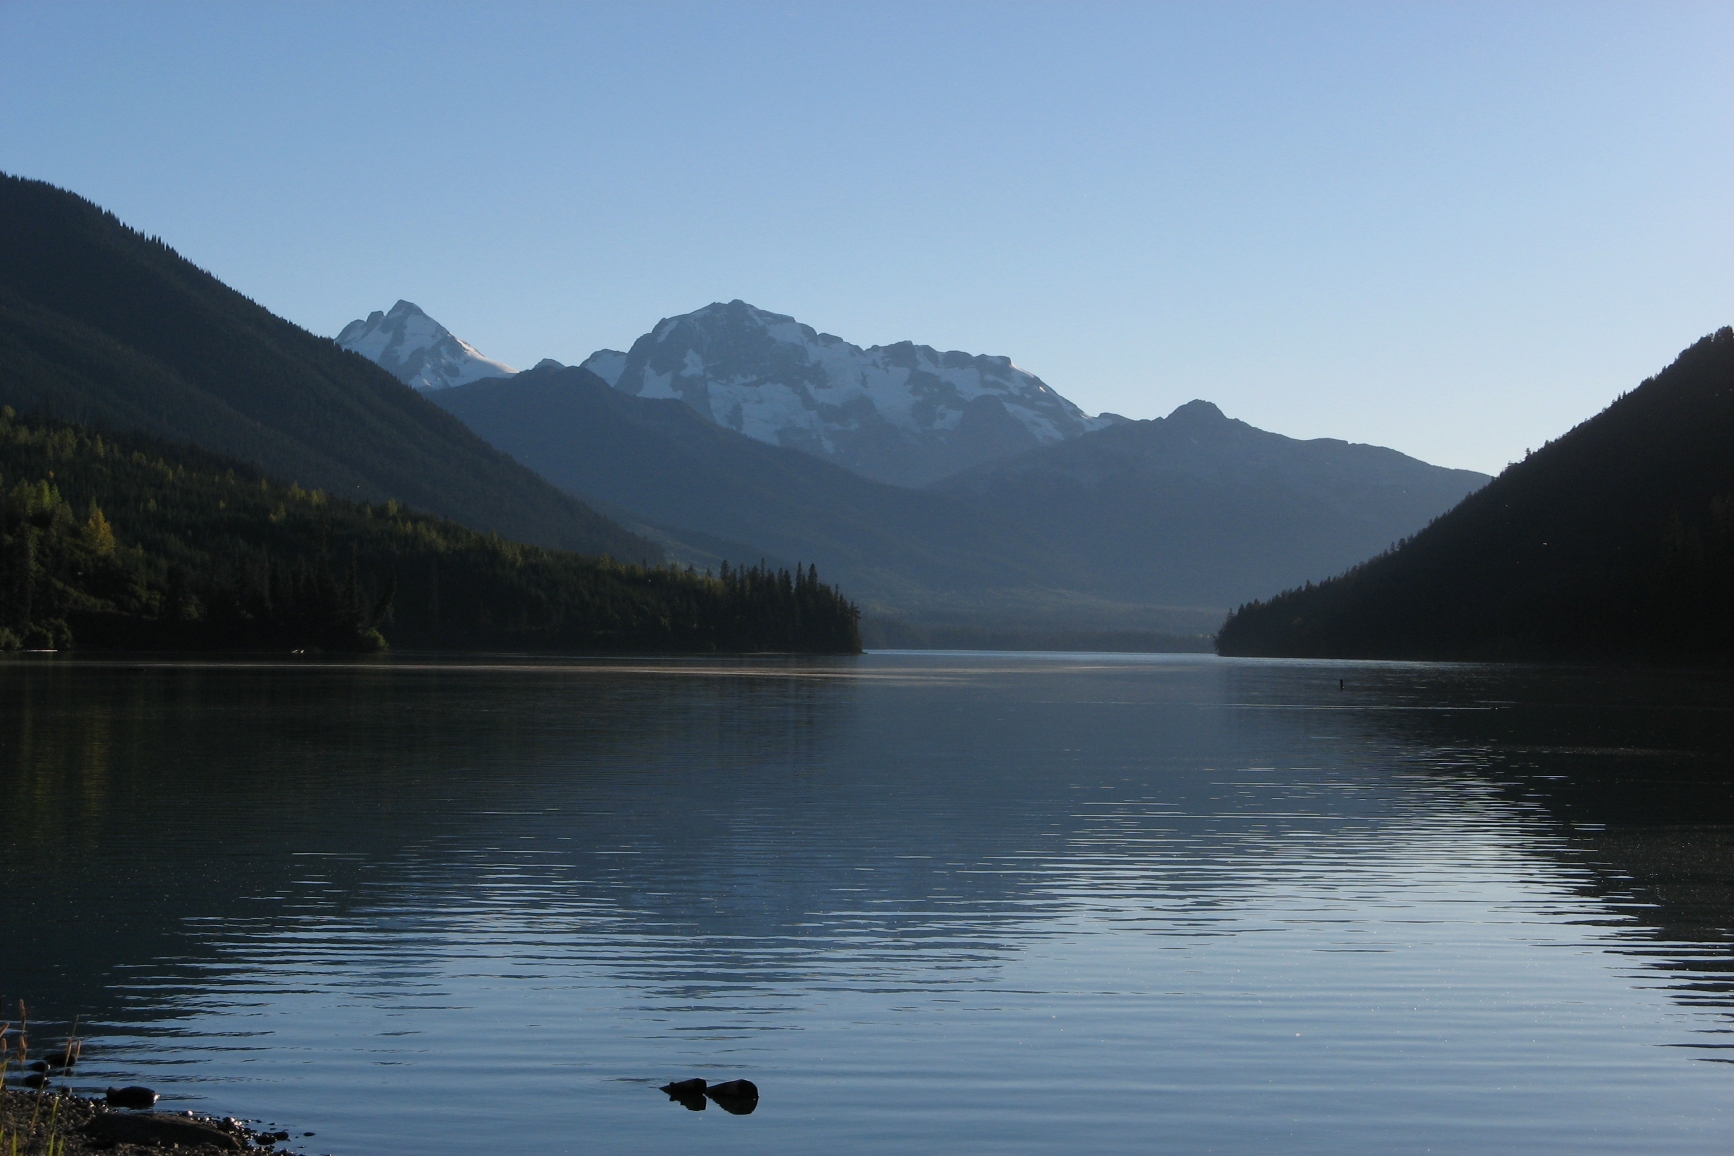 View of Duffey Lake with mountains in the background